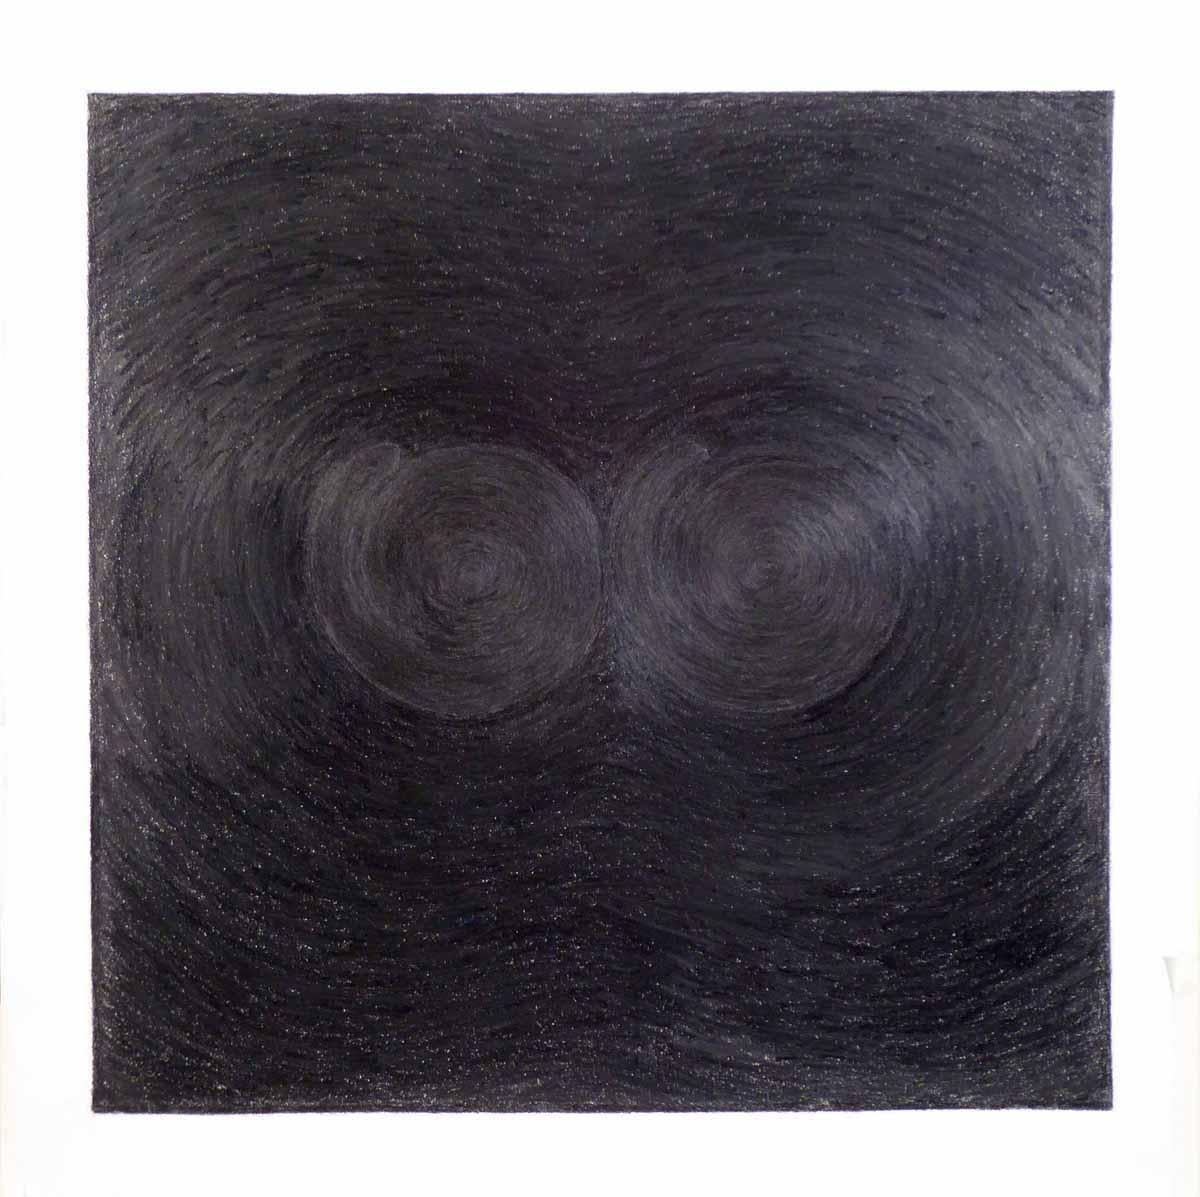 Receptors - Geometric Circular Abstraction, Graphite on Paper, Framed - Art by Joe Royer